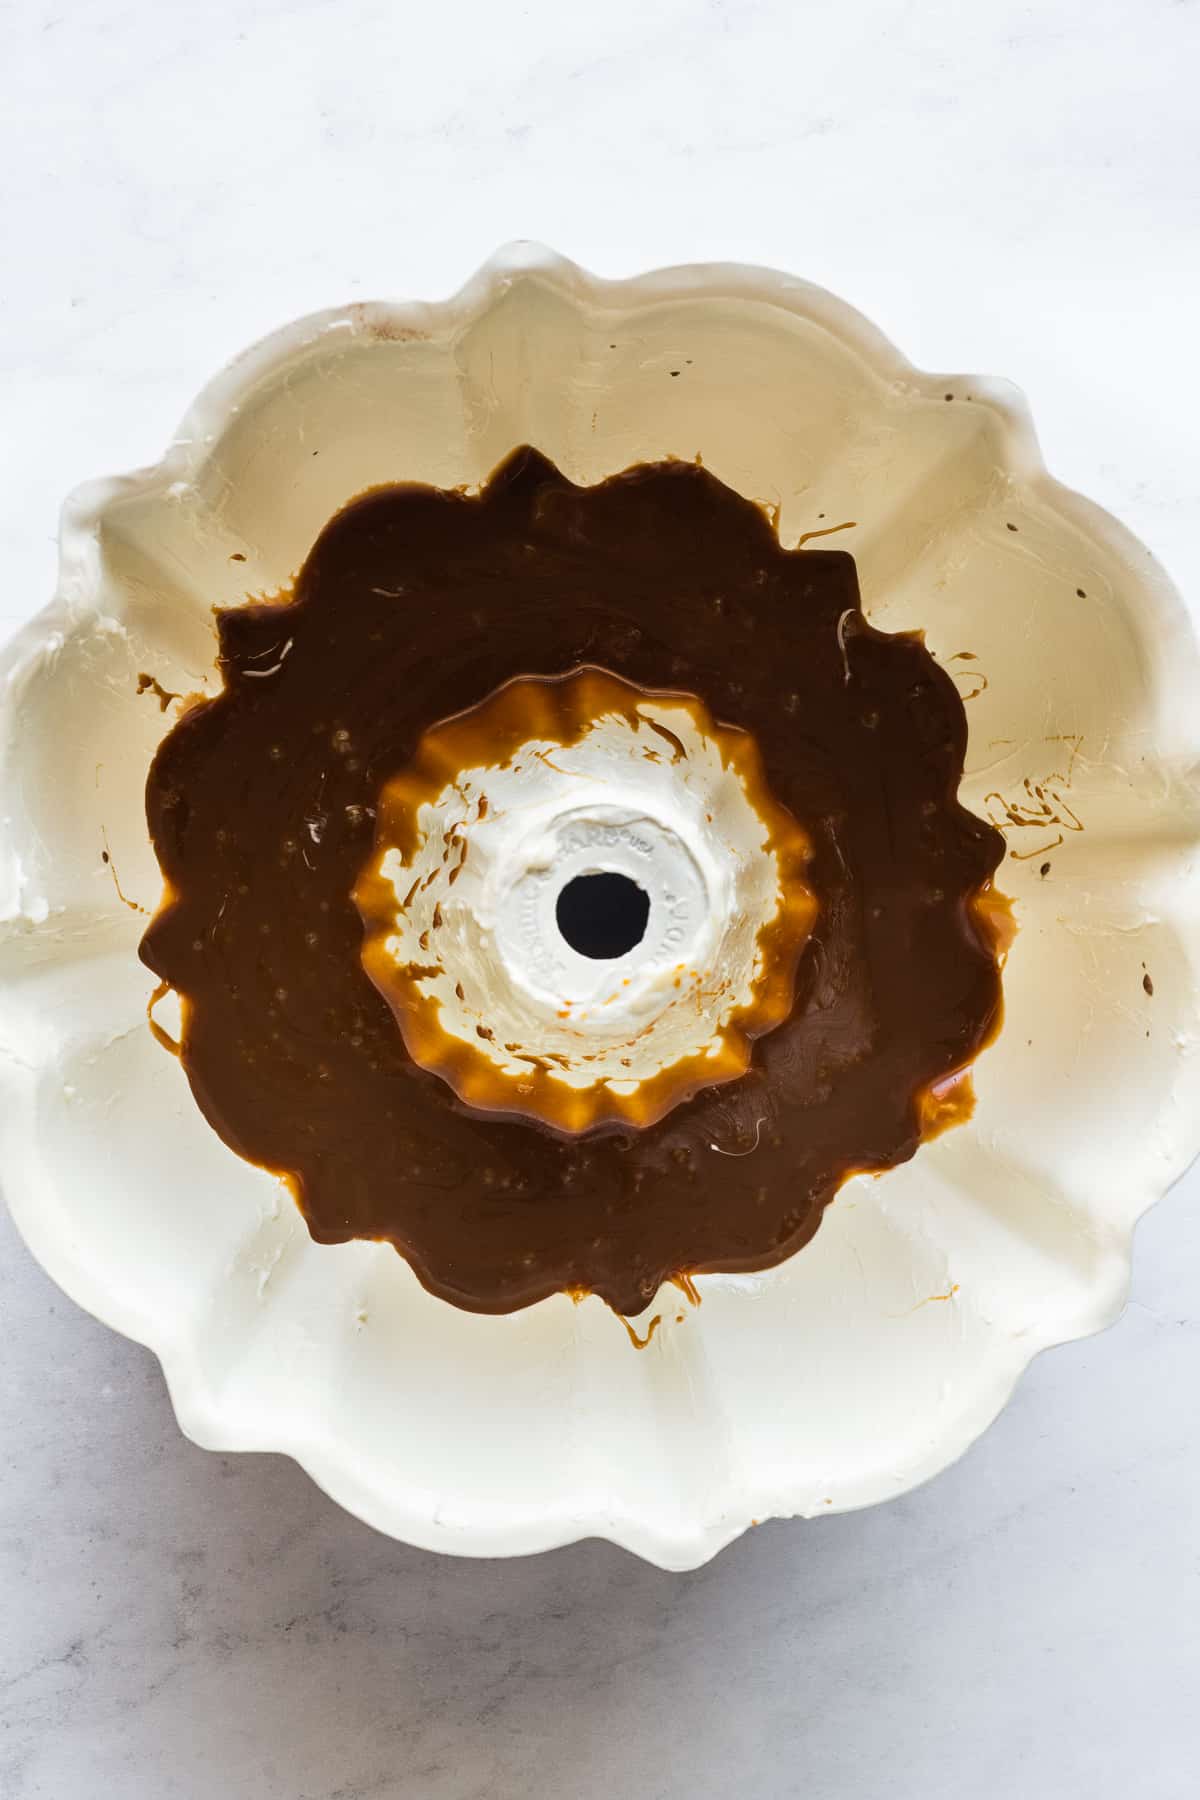 A bundt pan greased with butter and a layer of cajeta on the bottom.